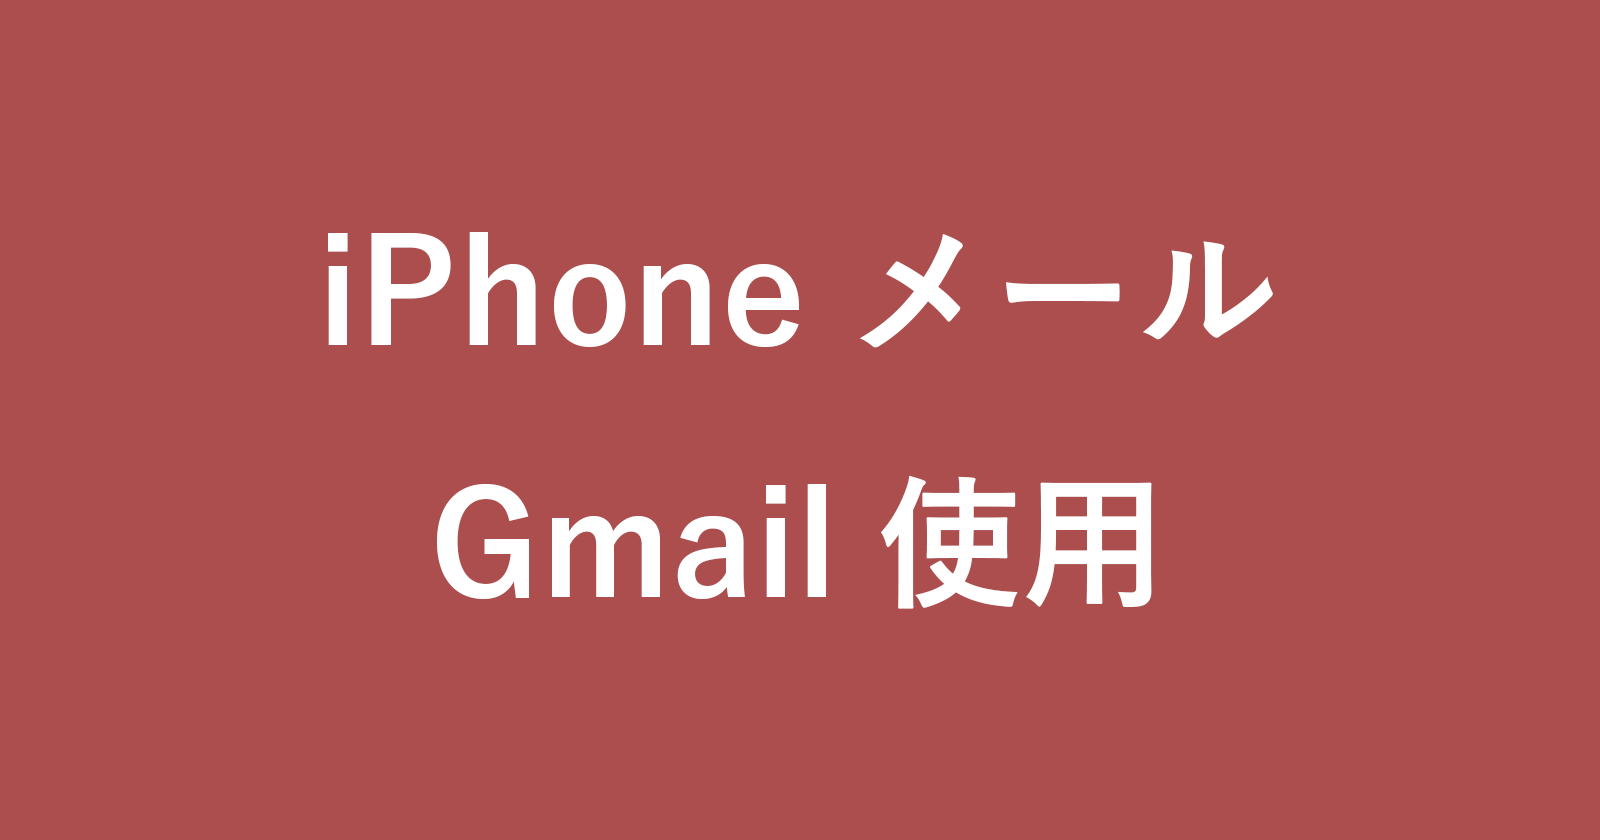 iphone app mail gmail